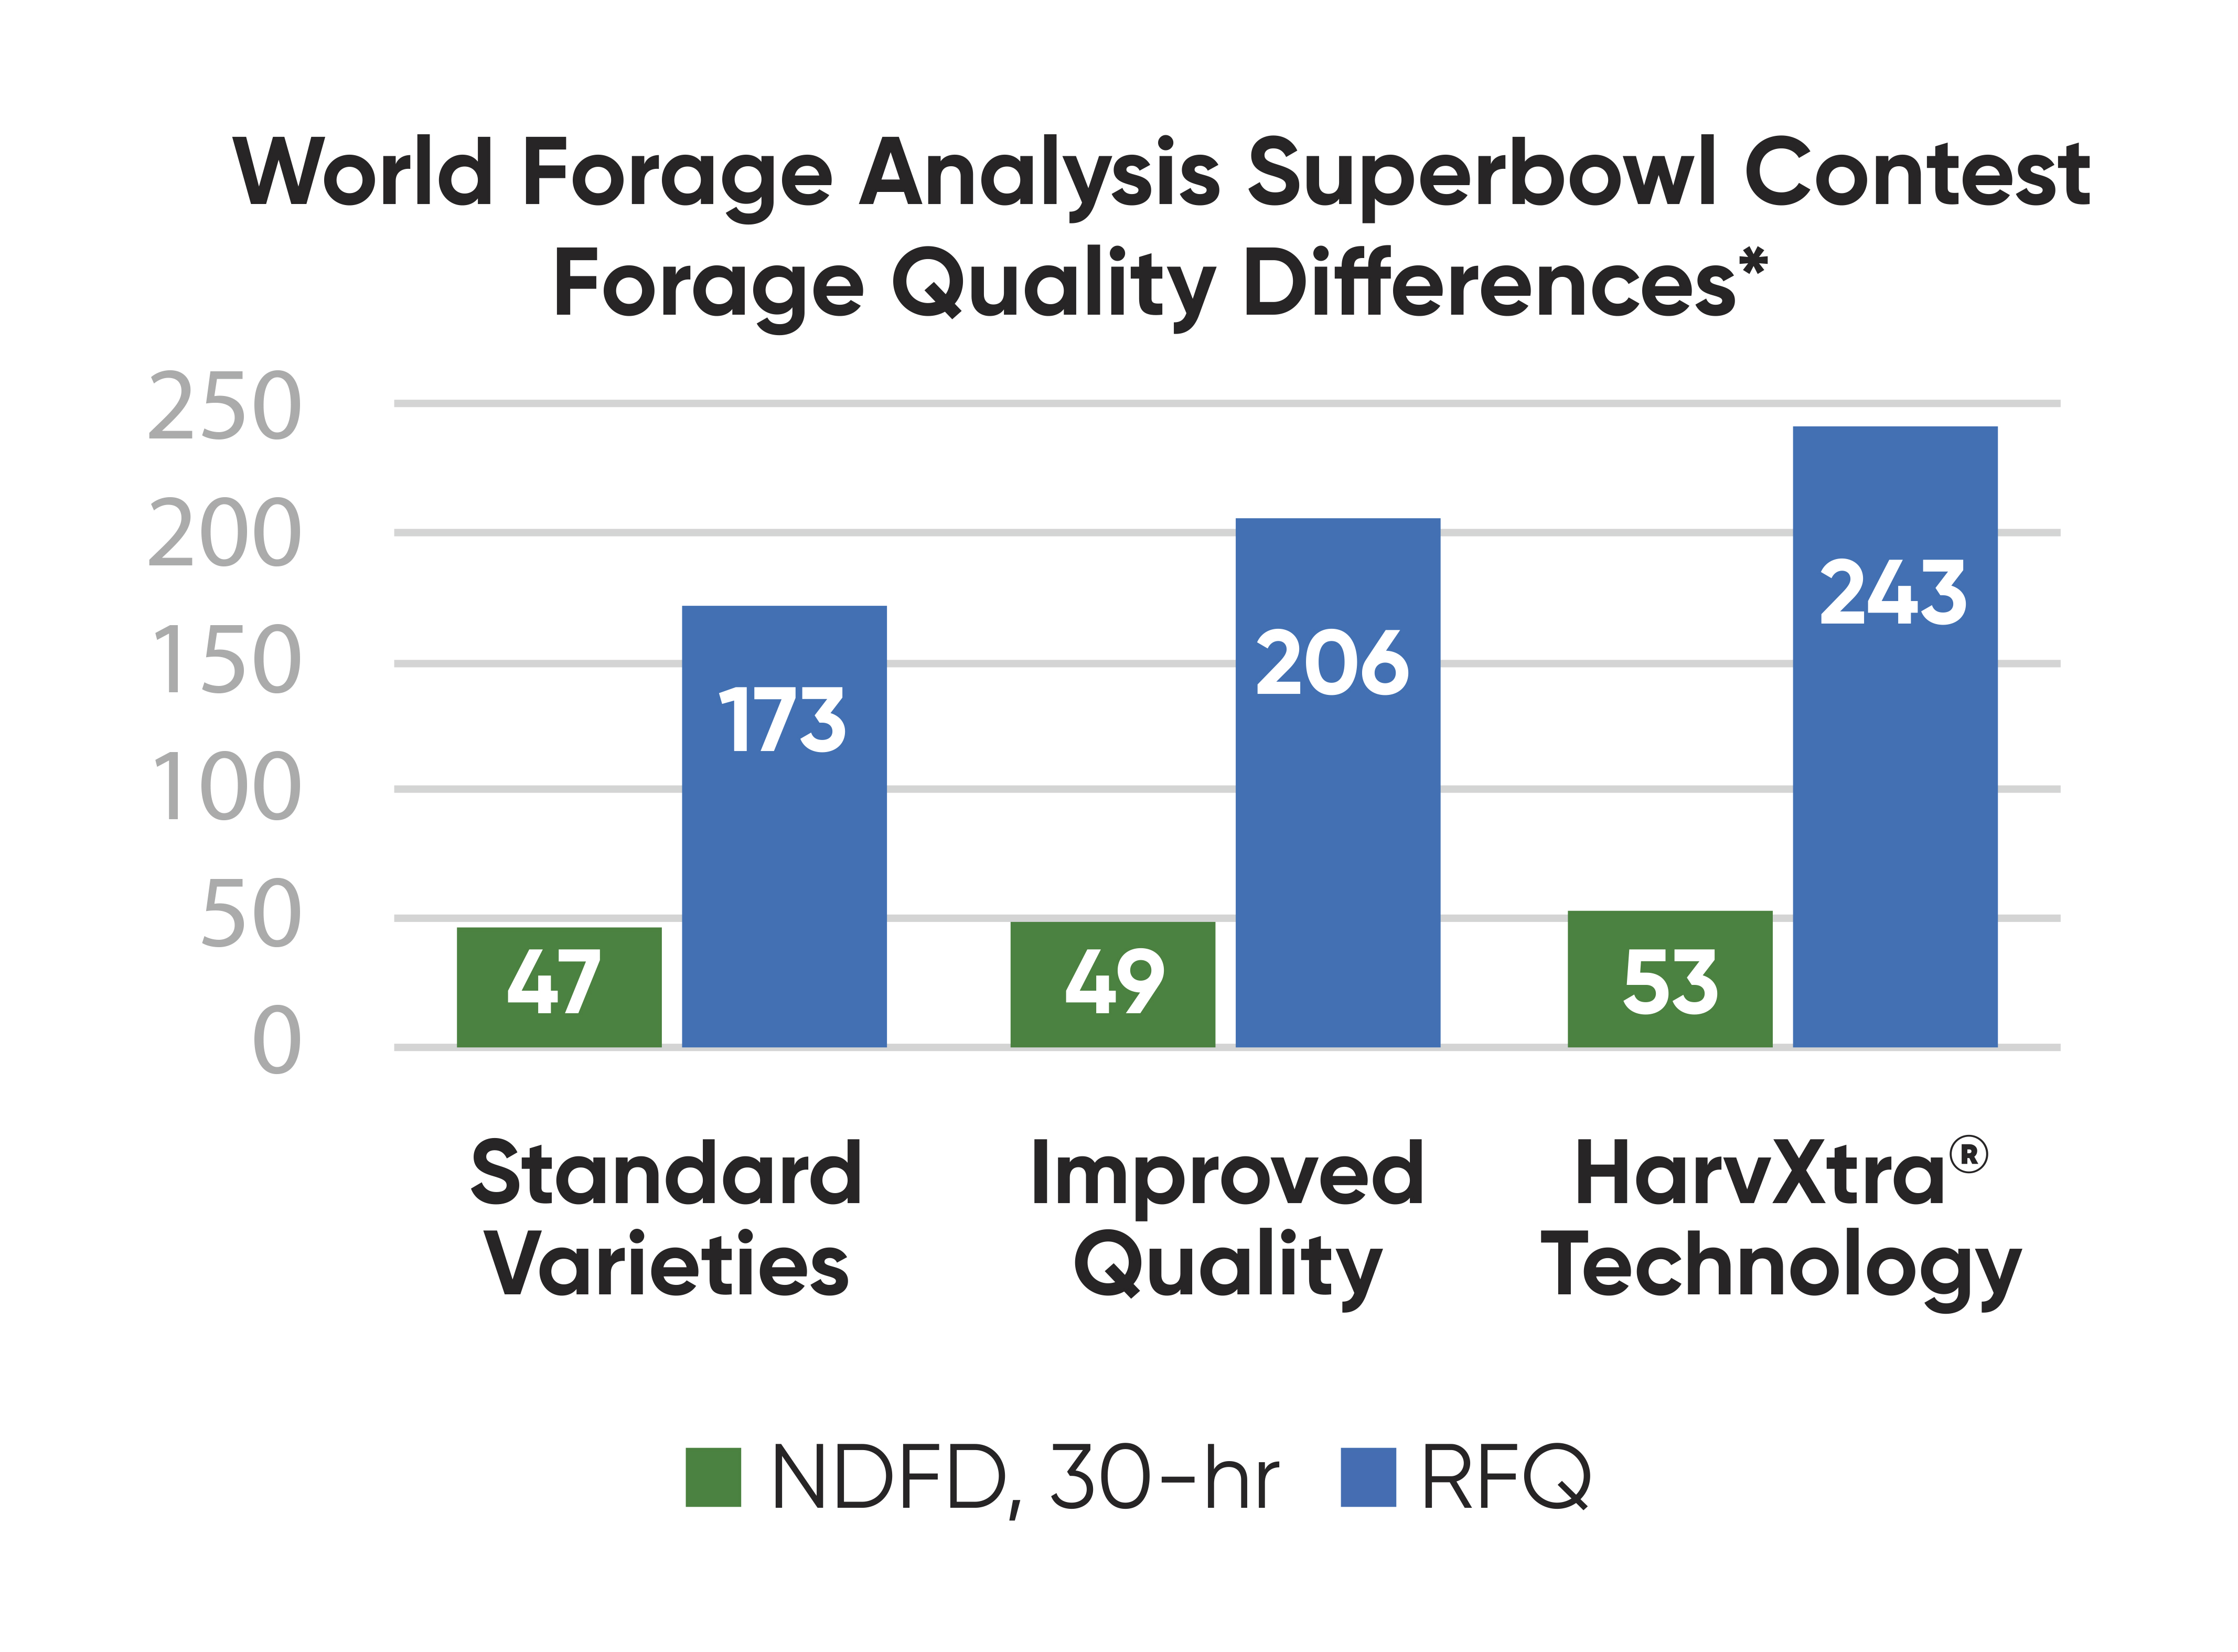 Alfalfa varieties with HarvXtra technology had higher NDFD and higher relative forage quality than standard unimproved alfalfa varieties.